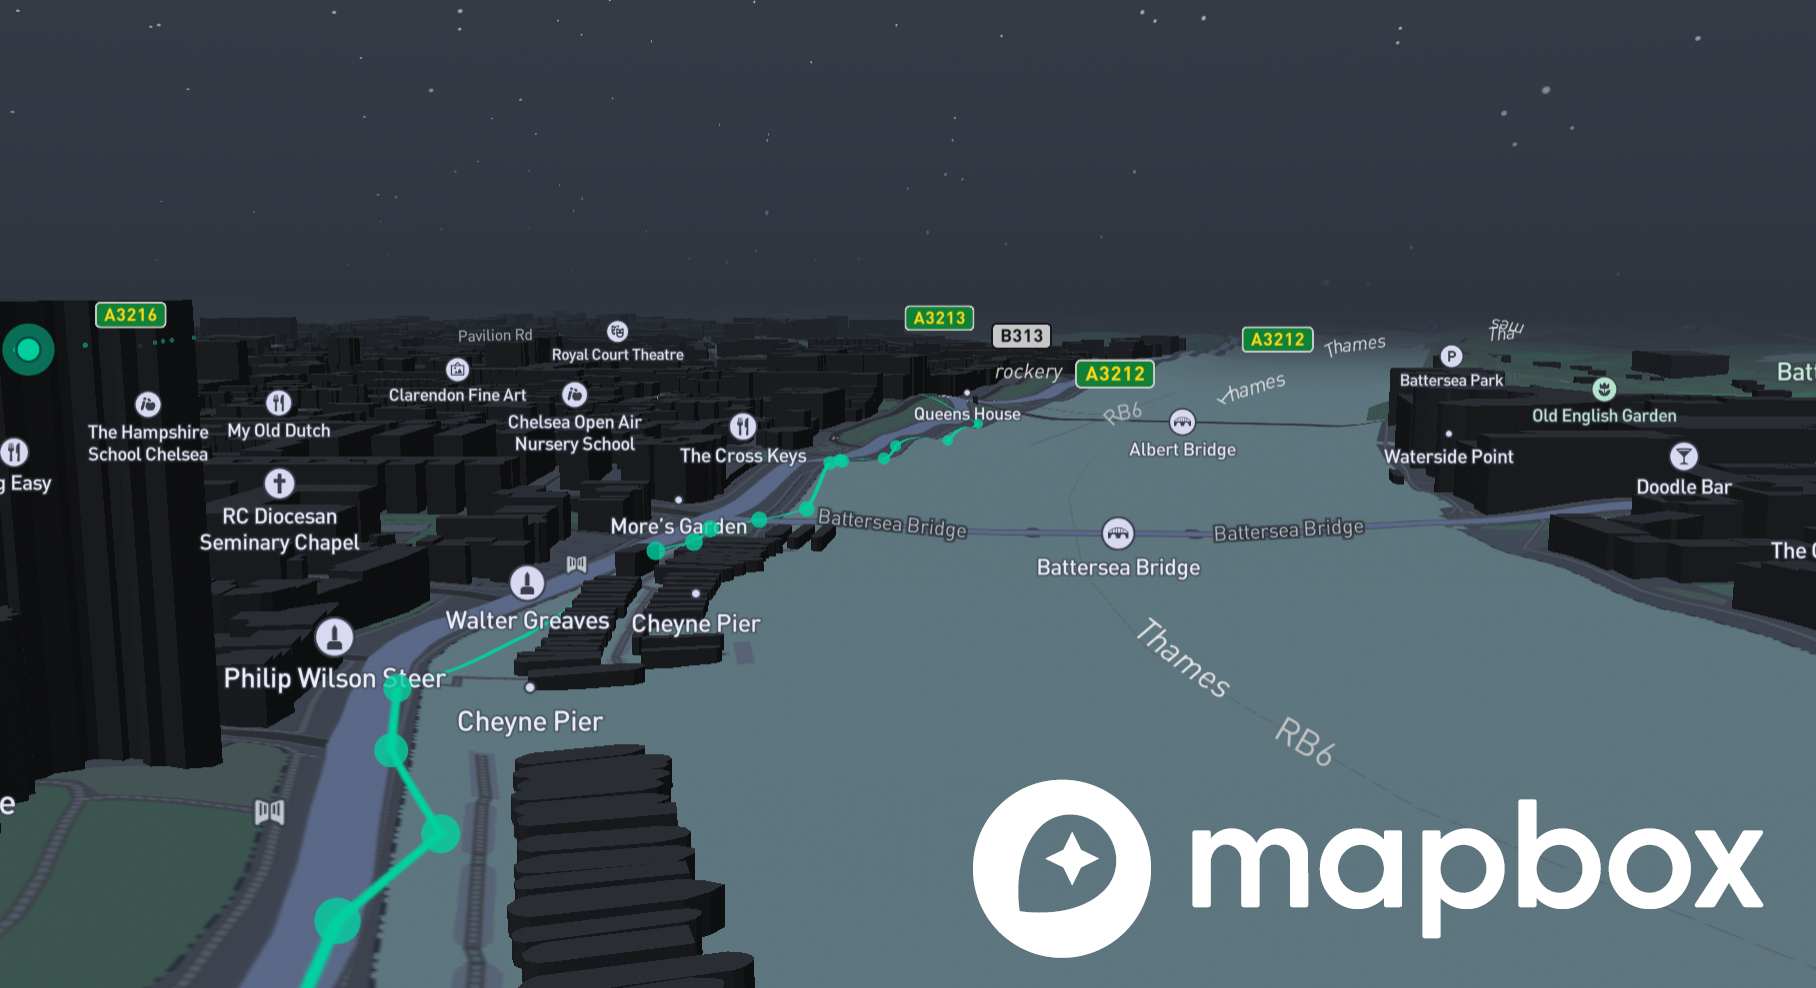 Asset Tracking Maps provided by Mapbox